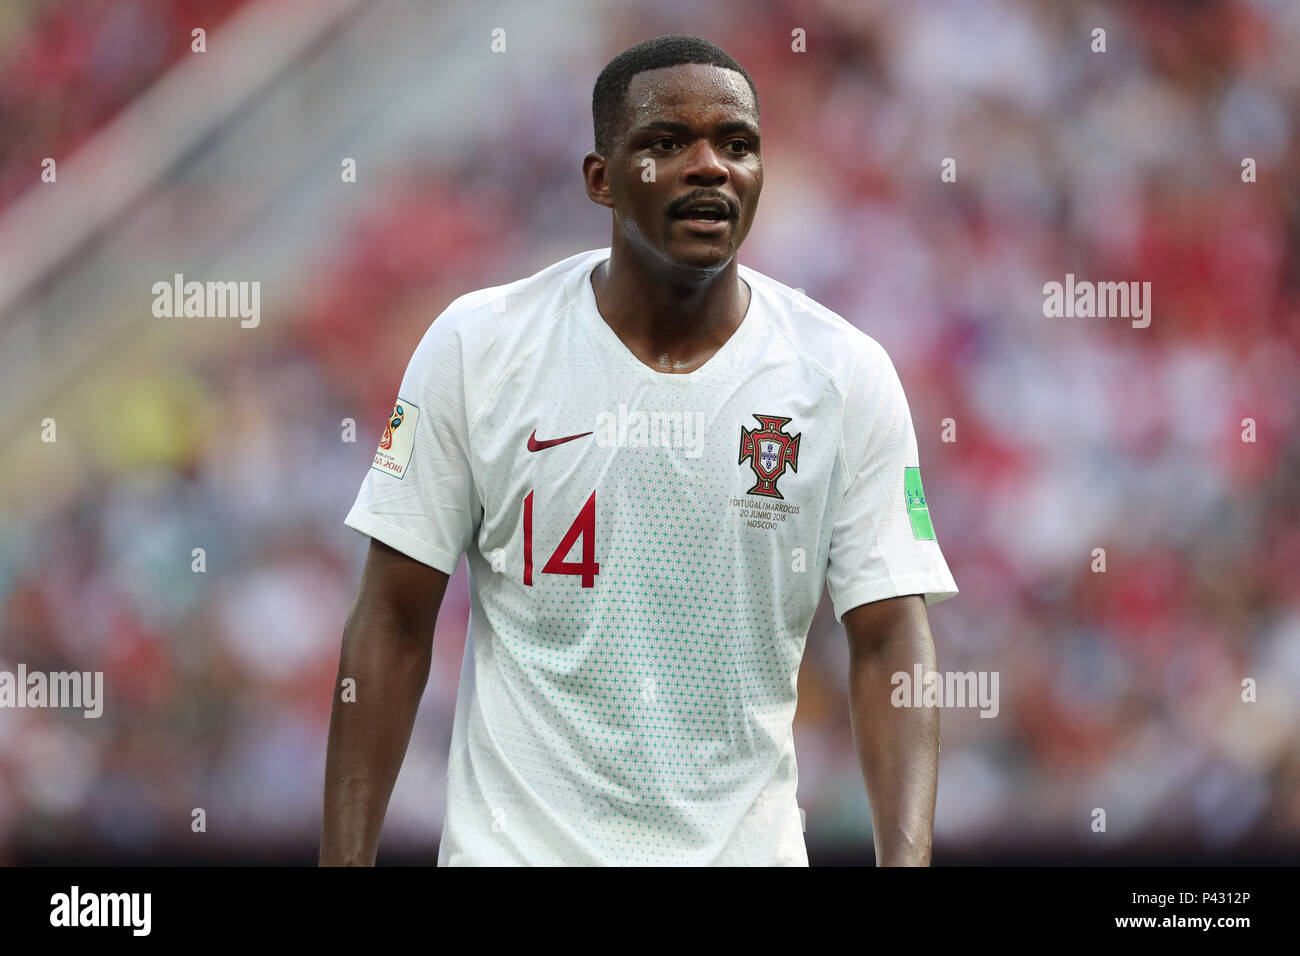 Moscow, Russia. 20th June, 2018. William Carvalho  PORTUGAL  PORTUGAL V MOROCCO , 2018 FIFA WORLD CUP RUSSIA  20 June 2018  GBC8501  Portugal v Morocco  2018 FIFA World Cup Russia    STRICTLY EDITORIAL USE ONLY.   If The Player/Players Depicted In This Image Is/Are Playing For An English Club Or The England National Team.   Then This Image May Only Be Used For Editorial Purposes. No Commercial Use.    The Following Usages Are Also Restricted EVEN IF IN AN EDITORIAL CONTEXT:   Use in conjuction with, or part of, any unauthorized audio, video, data, fixture lists, club/league logos, Betting, Gam Stock Photo